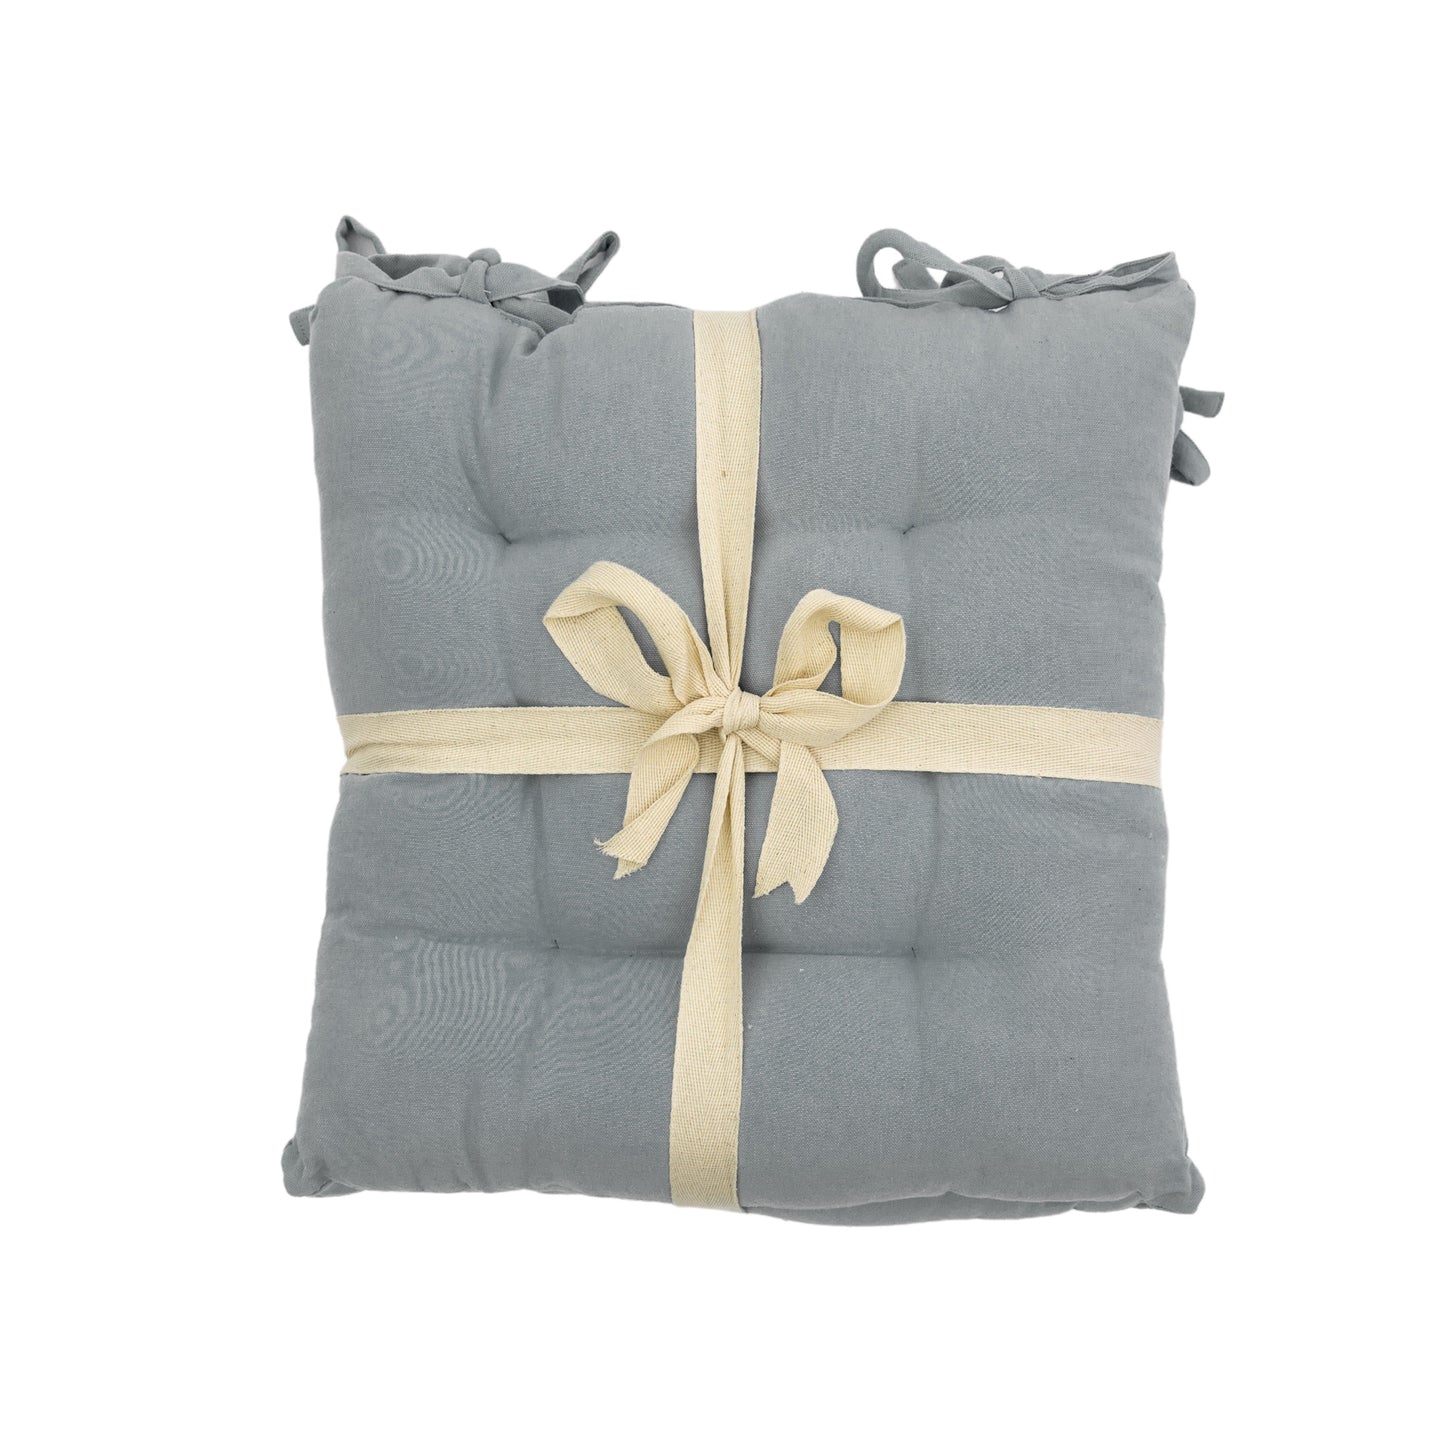 A SC Plain Cotton Seatpad Grey 430x430mm (2pk) with a ribbon tied around it for home furniture and interior decor.